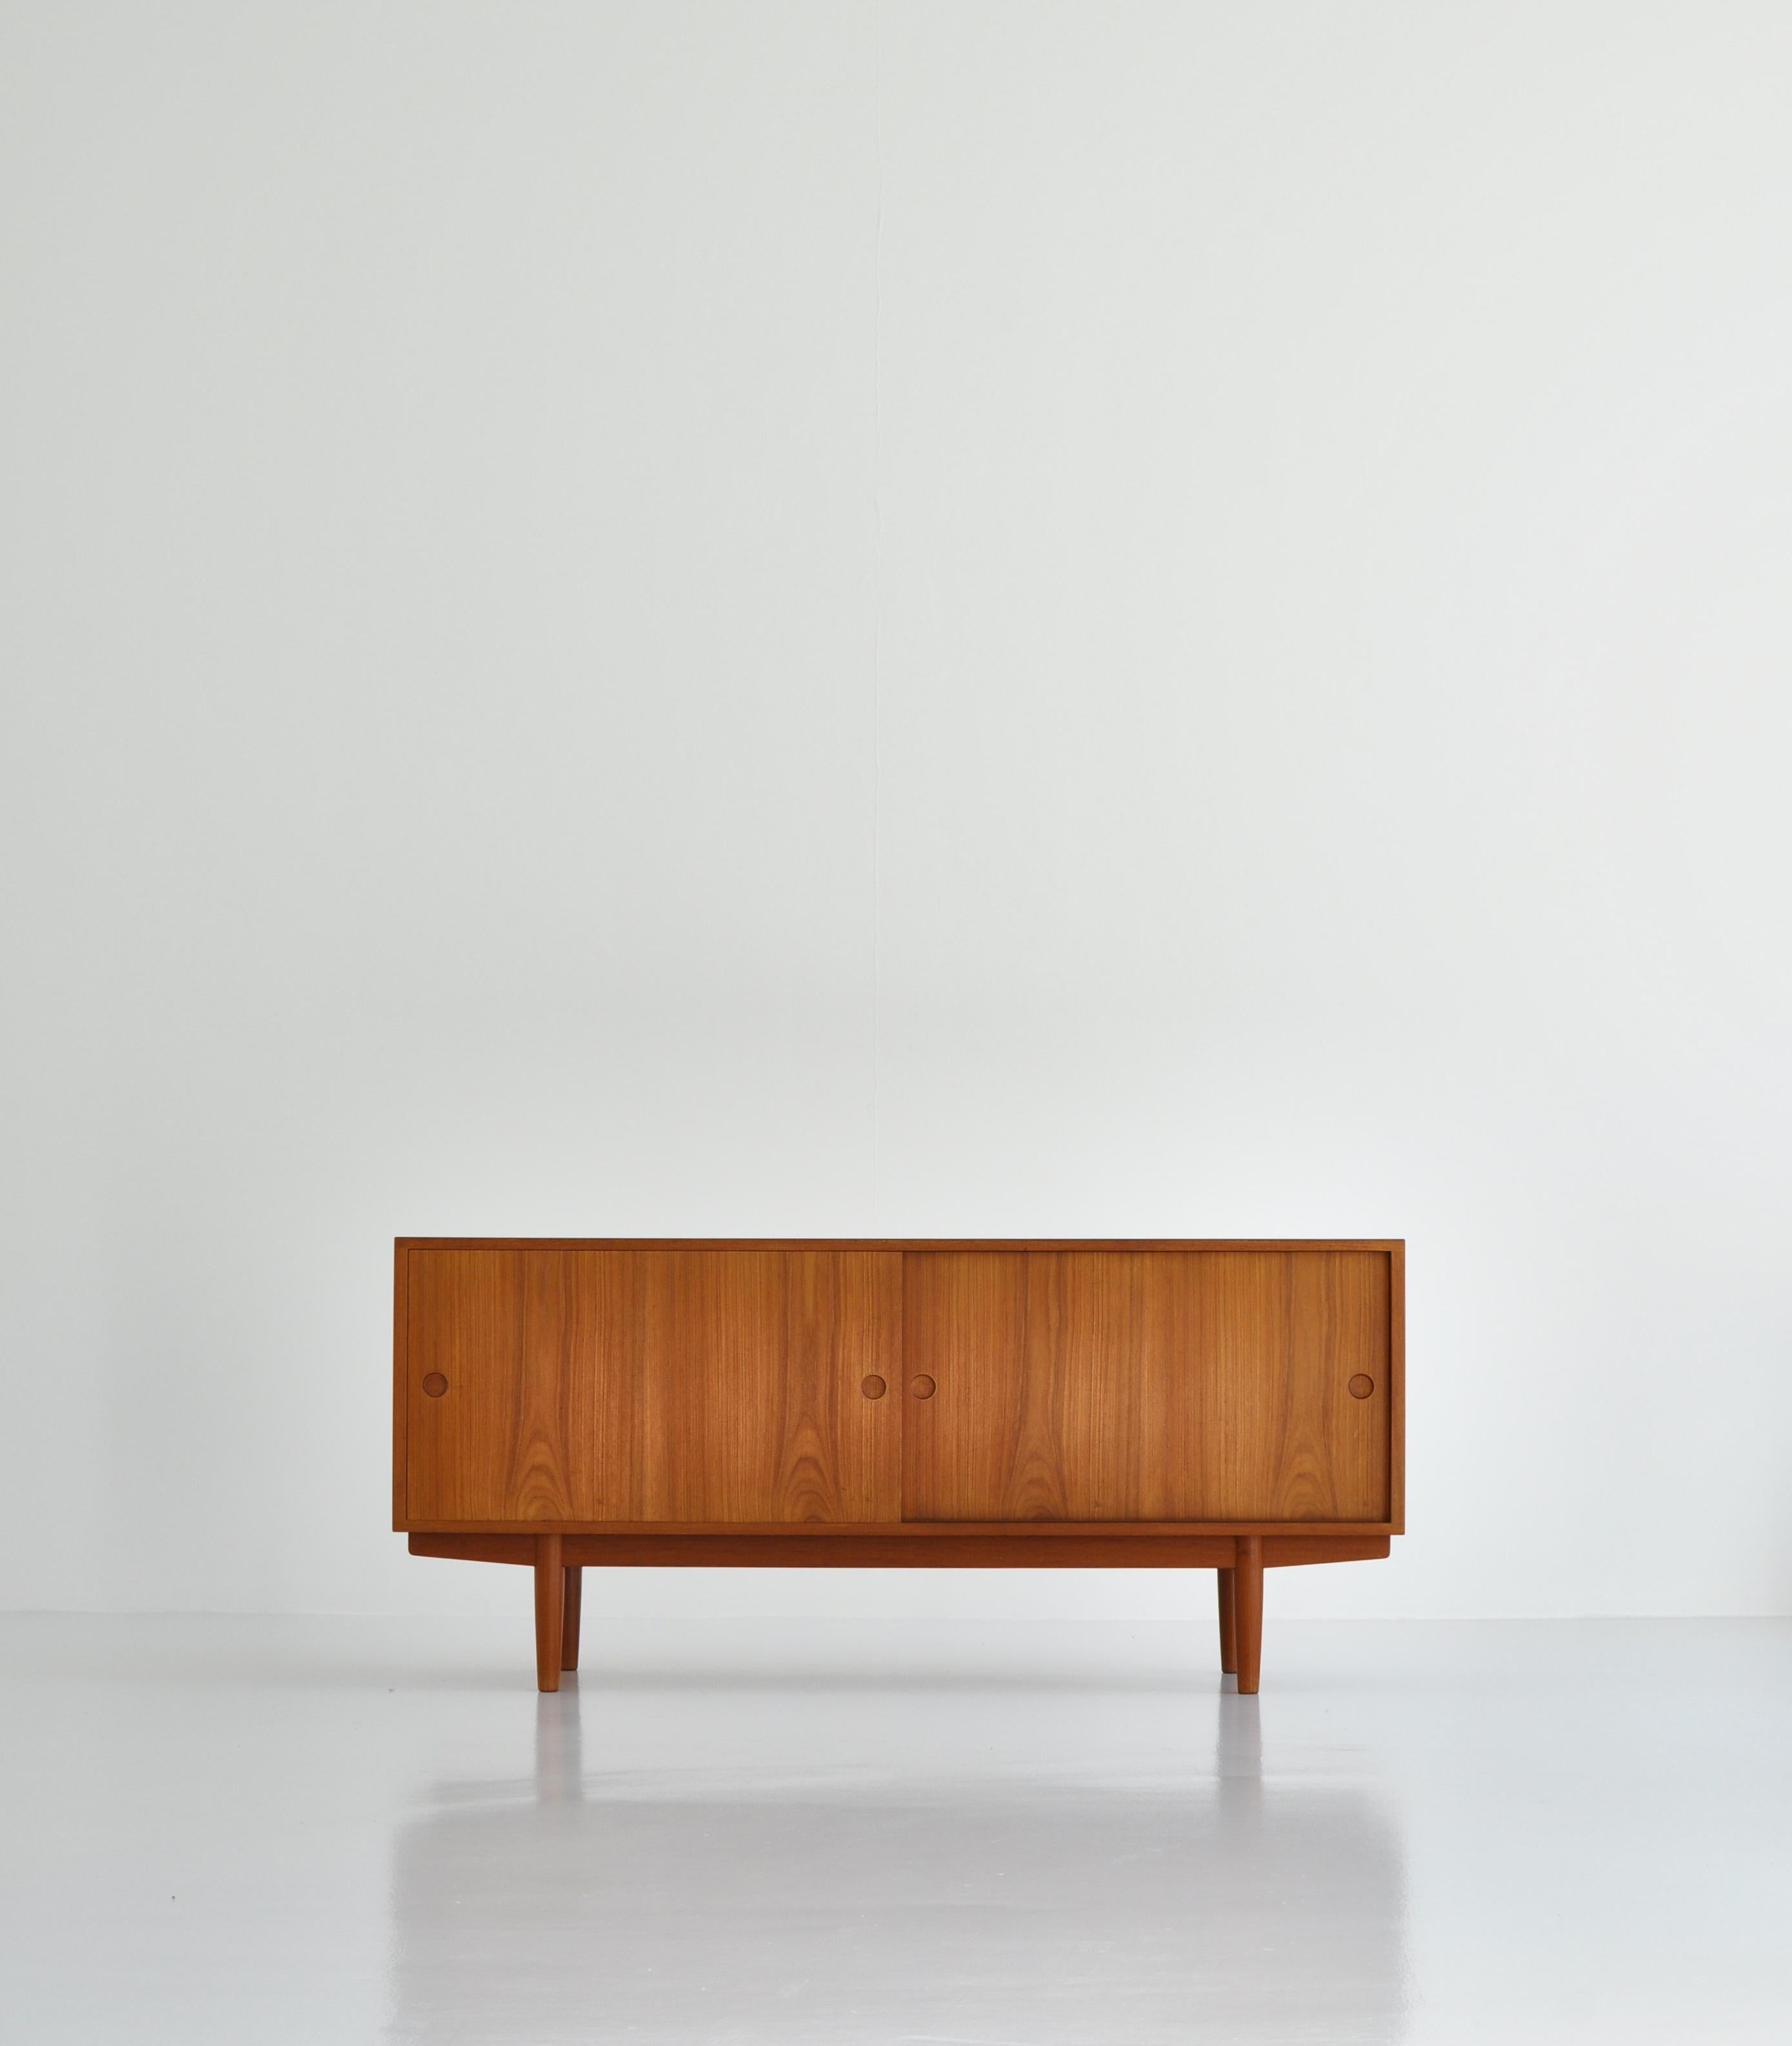 Rare sideboard designed by Hans J. Wegner and made at master cabinetmaker Johannes Hansens workshop. The sideboard is made for freestanding in the room and is in great condition.